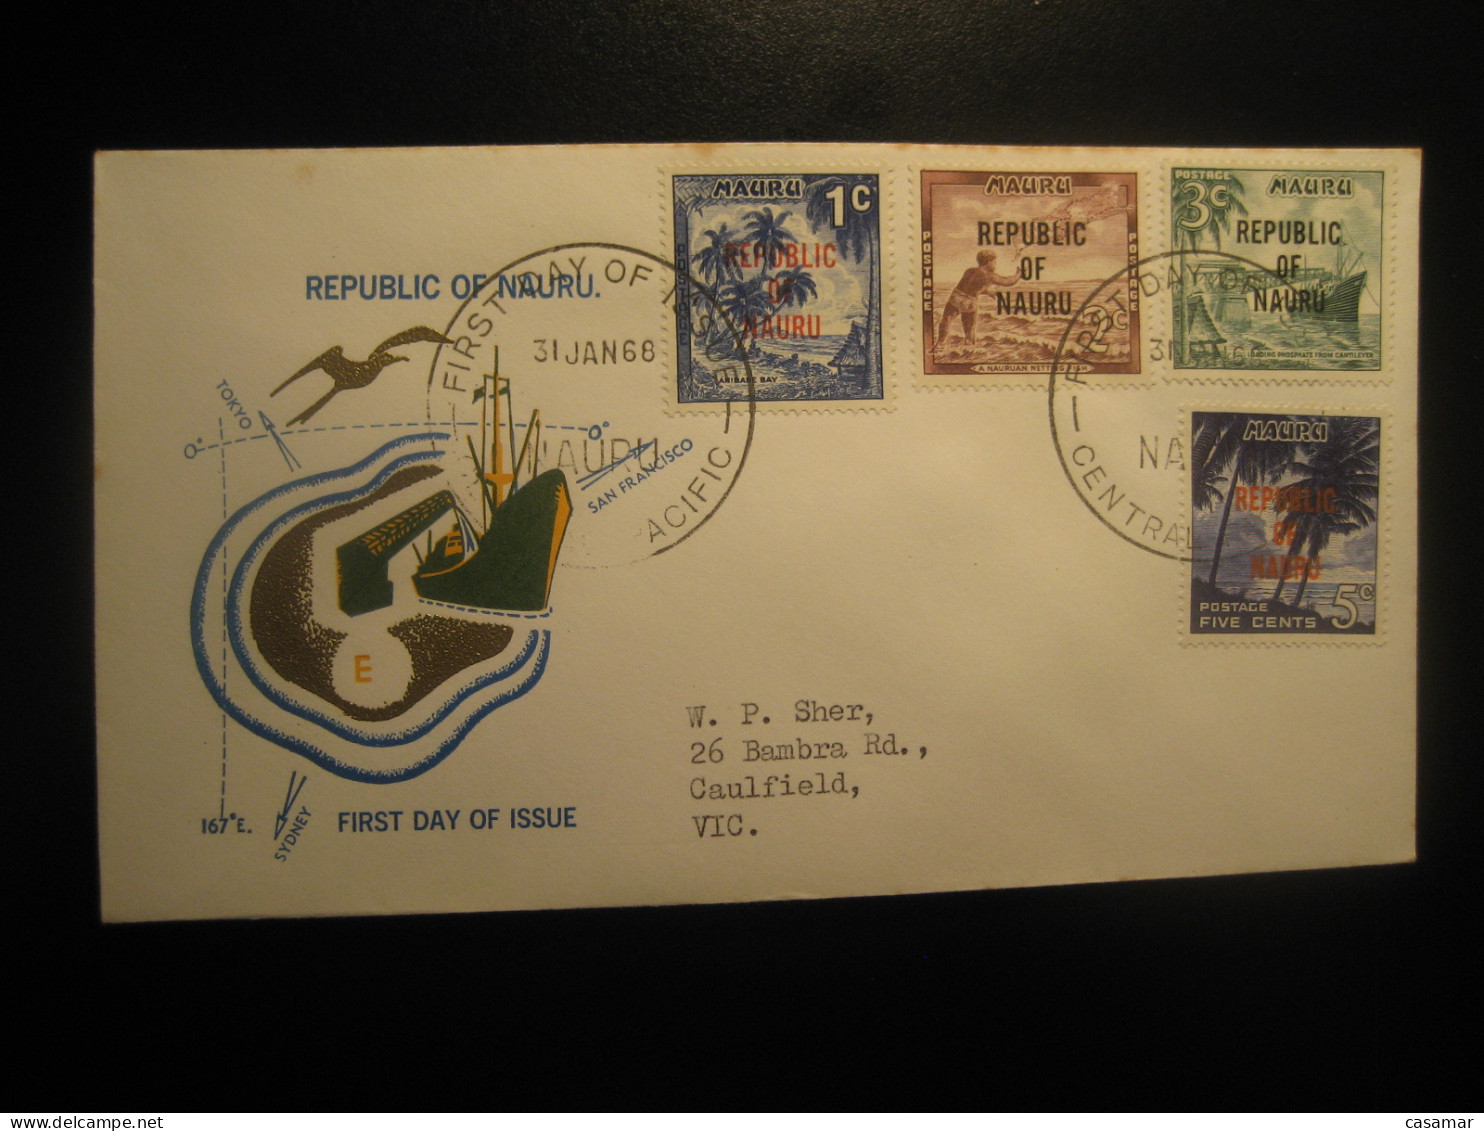 CENTRAL PACIFIC 1968 To Caulfield Australia Phosphate Geology Mineral Minerals FDC Cancel Cover NAURU - Minerals